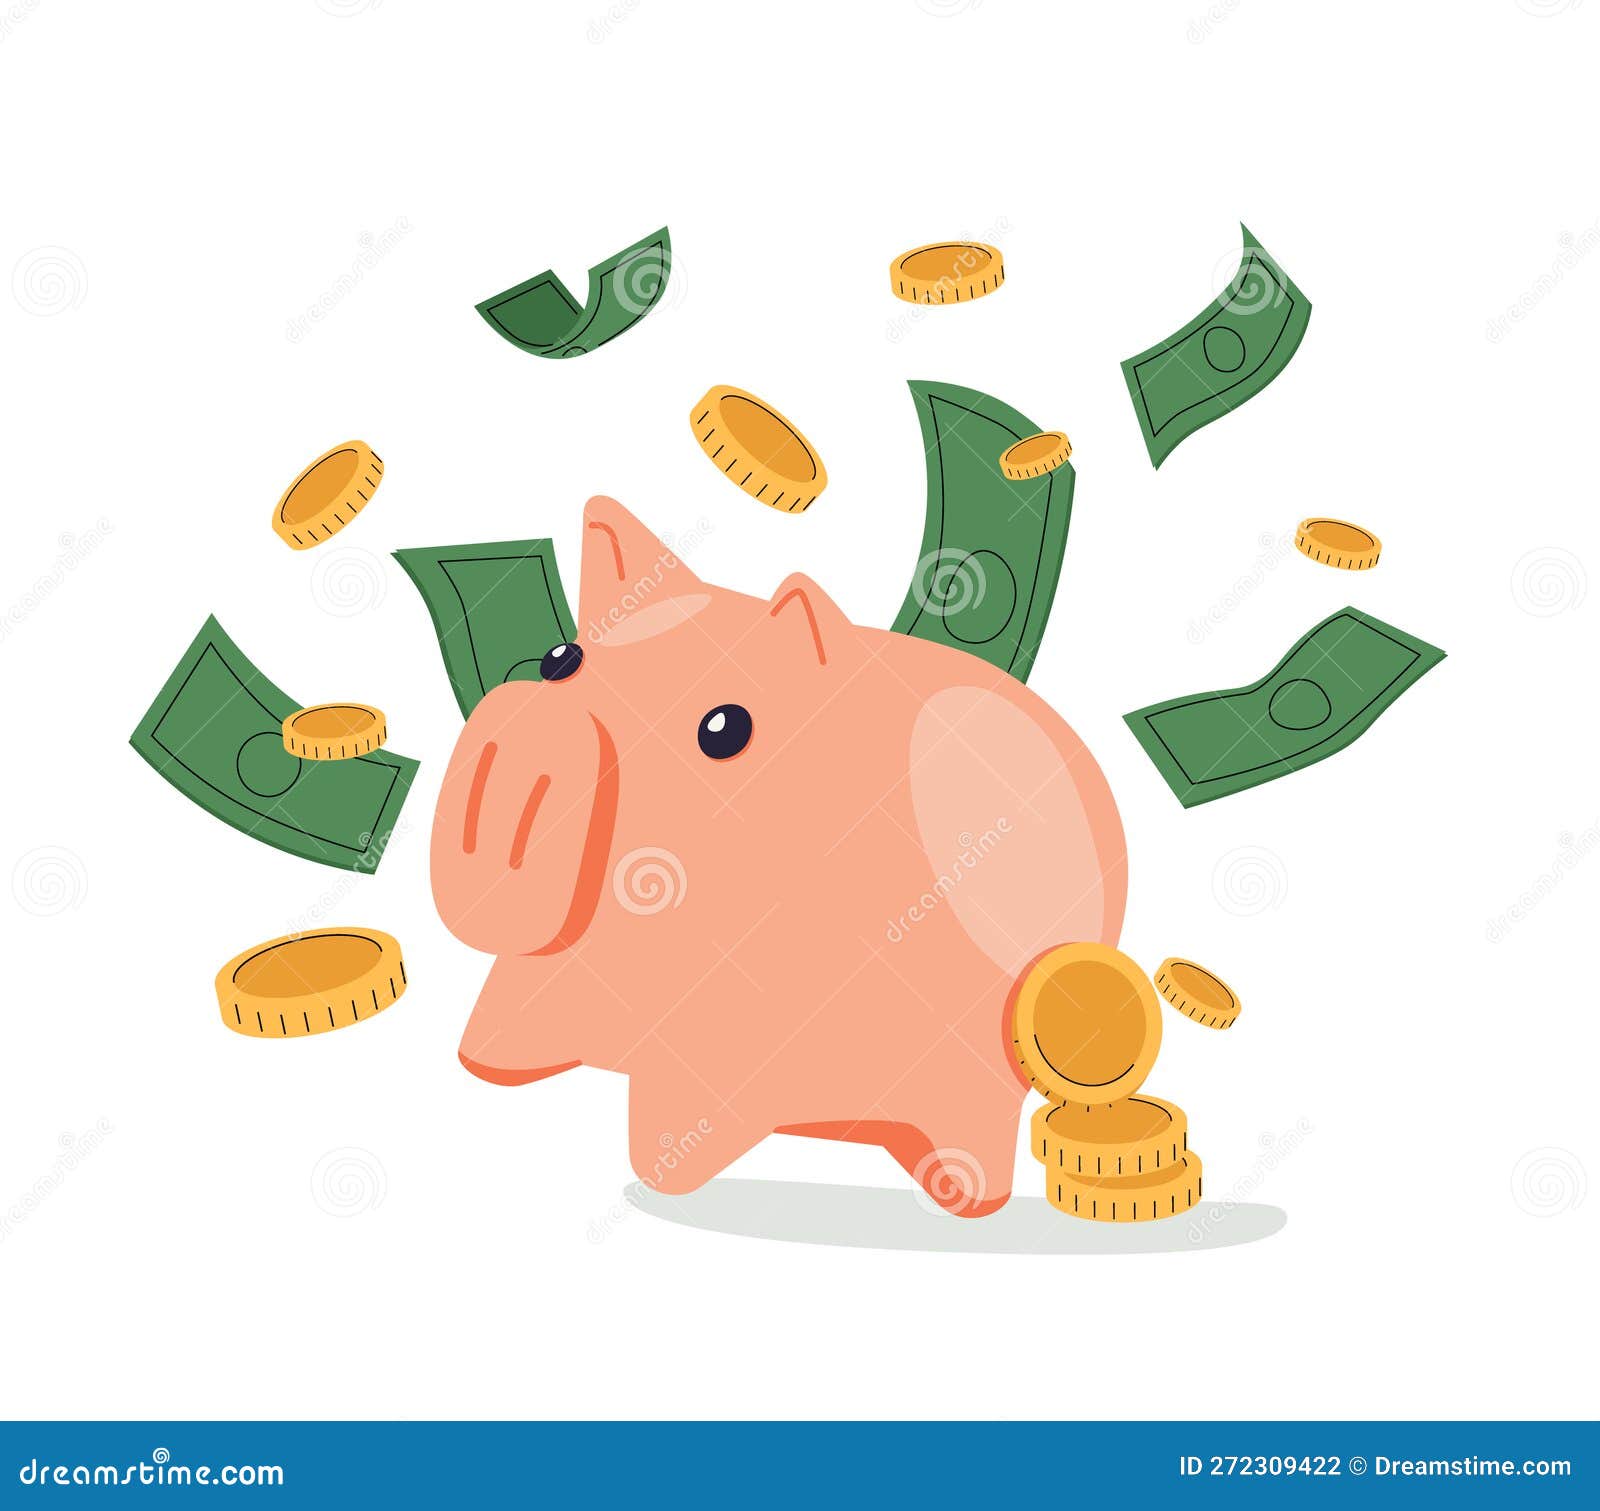 piggy bank with money flat cartoon creative business concept. investments, safe keeps gold coins. keep and accumulate